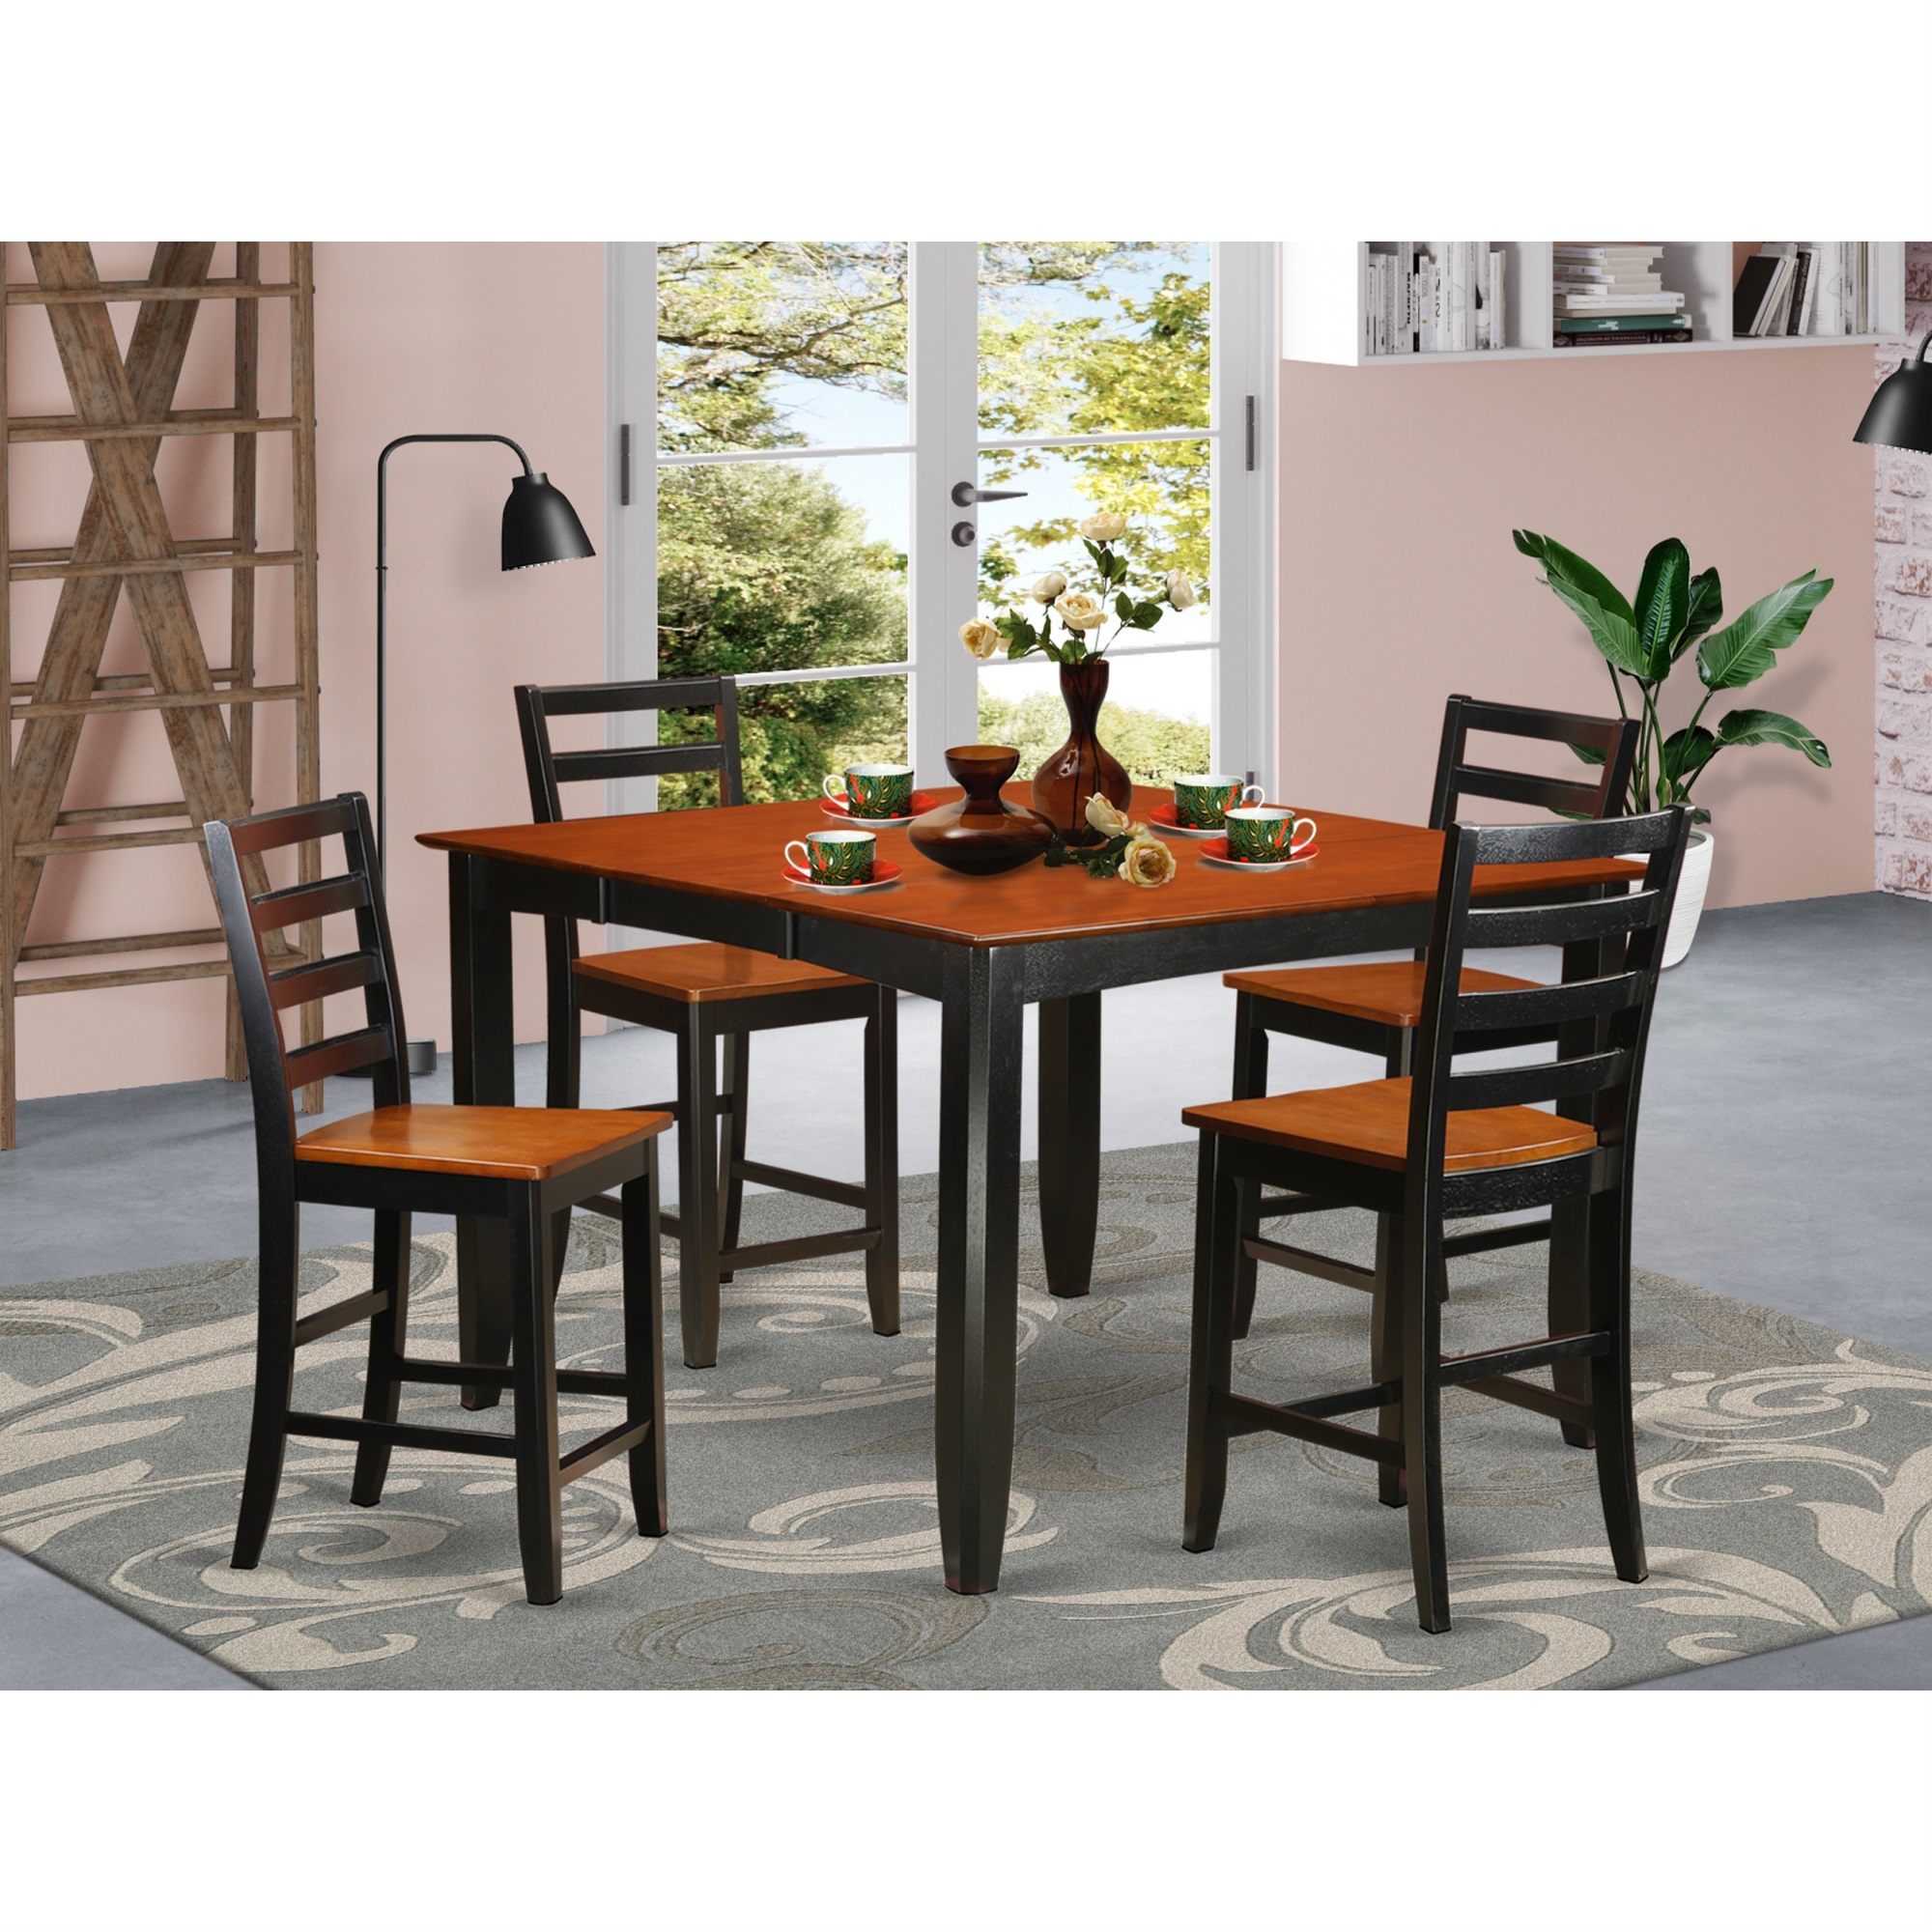 East West Furniture FAIR5-BLK-W 5 PC counter height Dining set- Square Counter height Table and 4 Dining Chairs